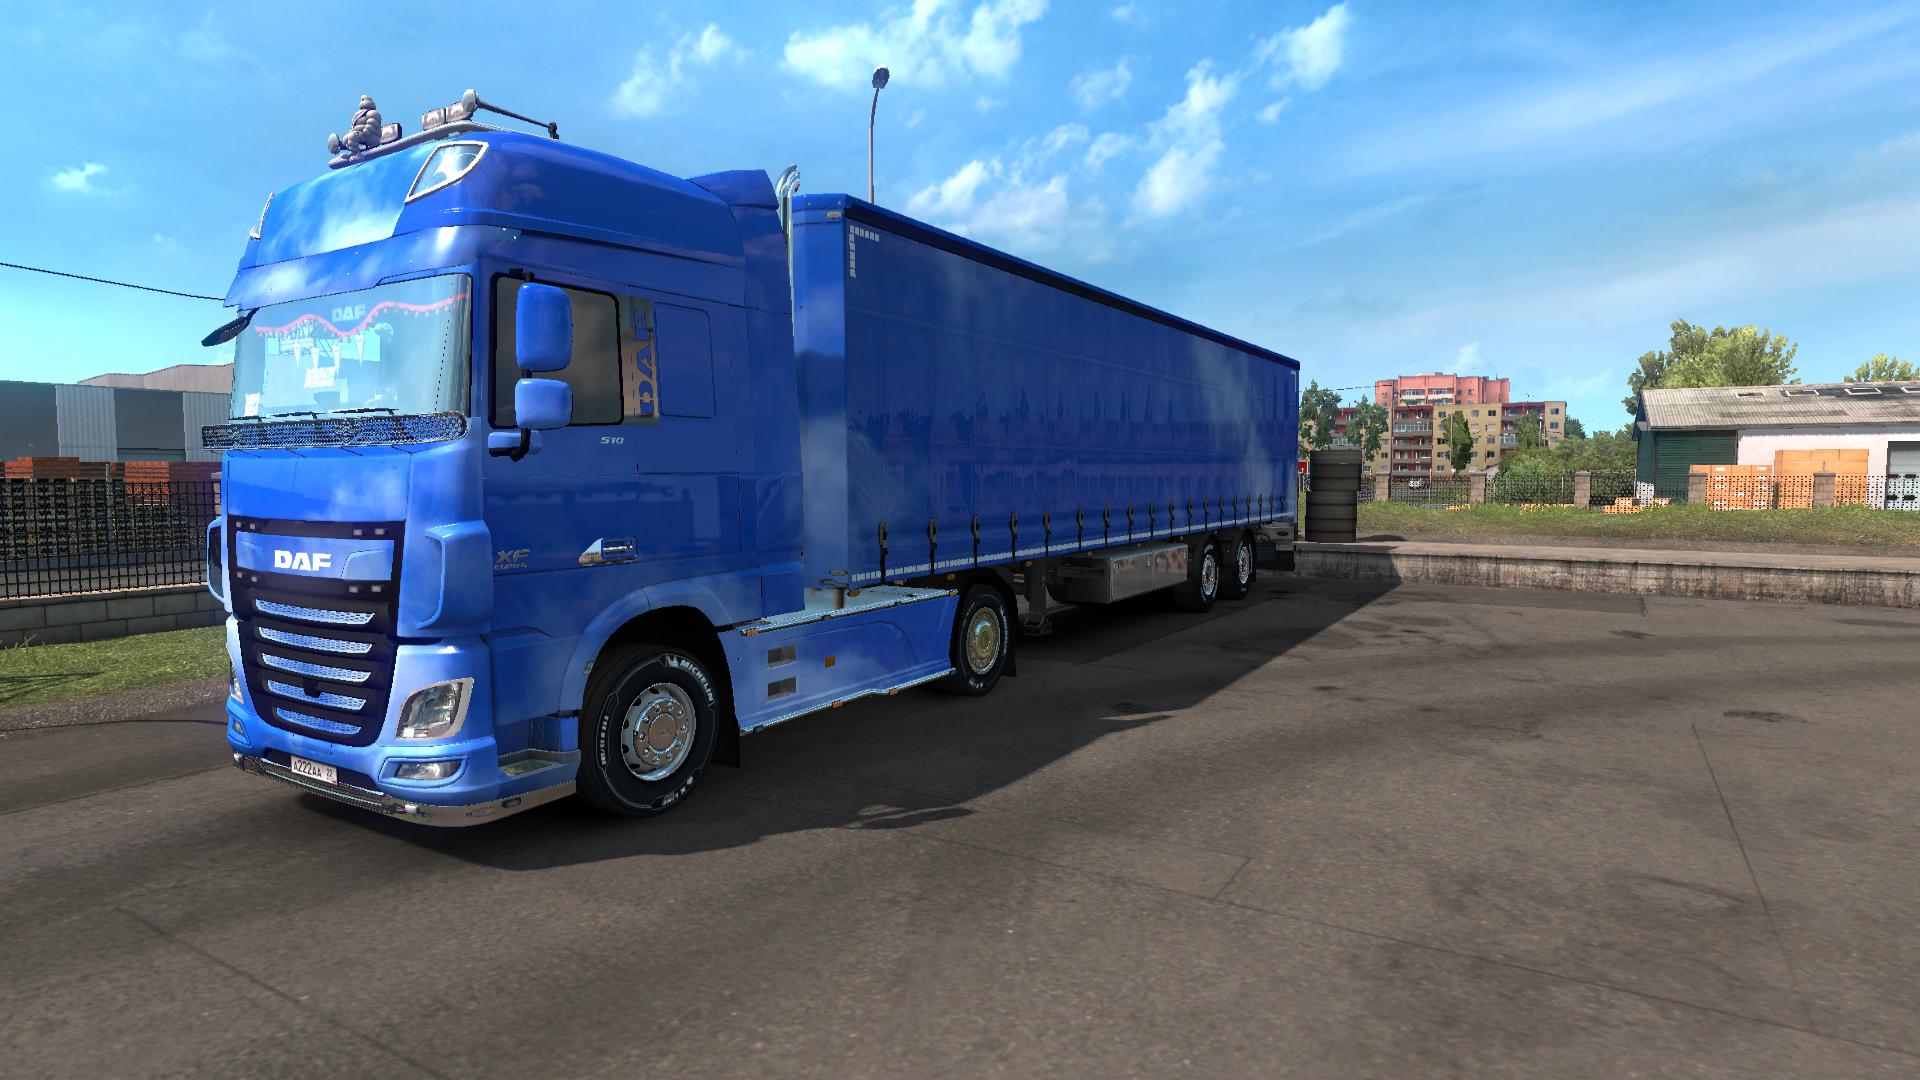 Skin Sky on all personal trailers except Platforms and Krone 1.33.x